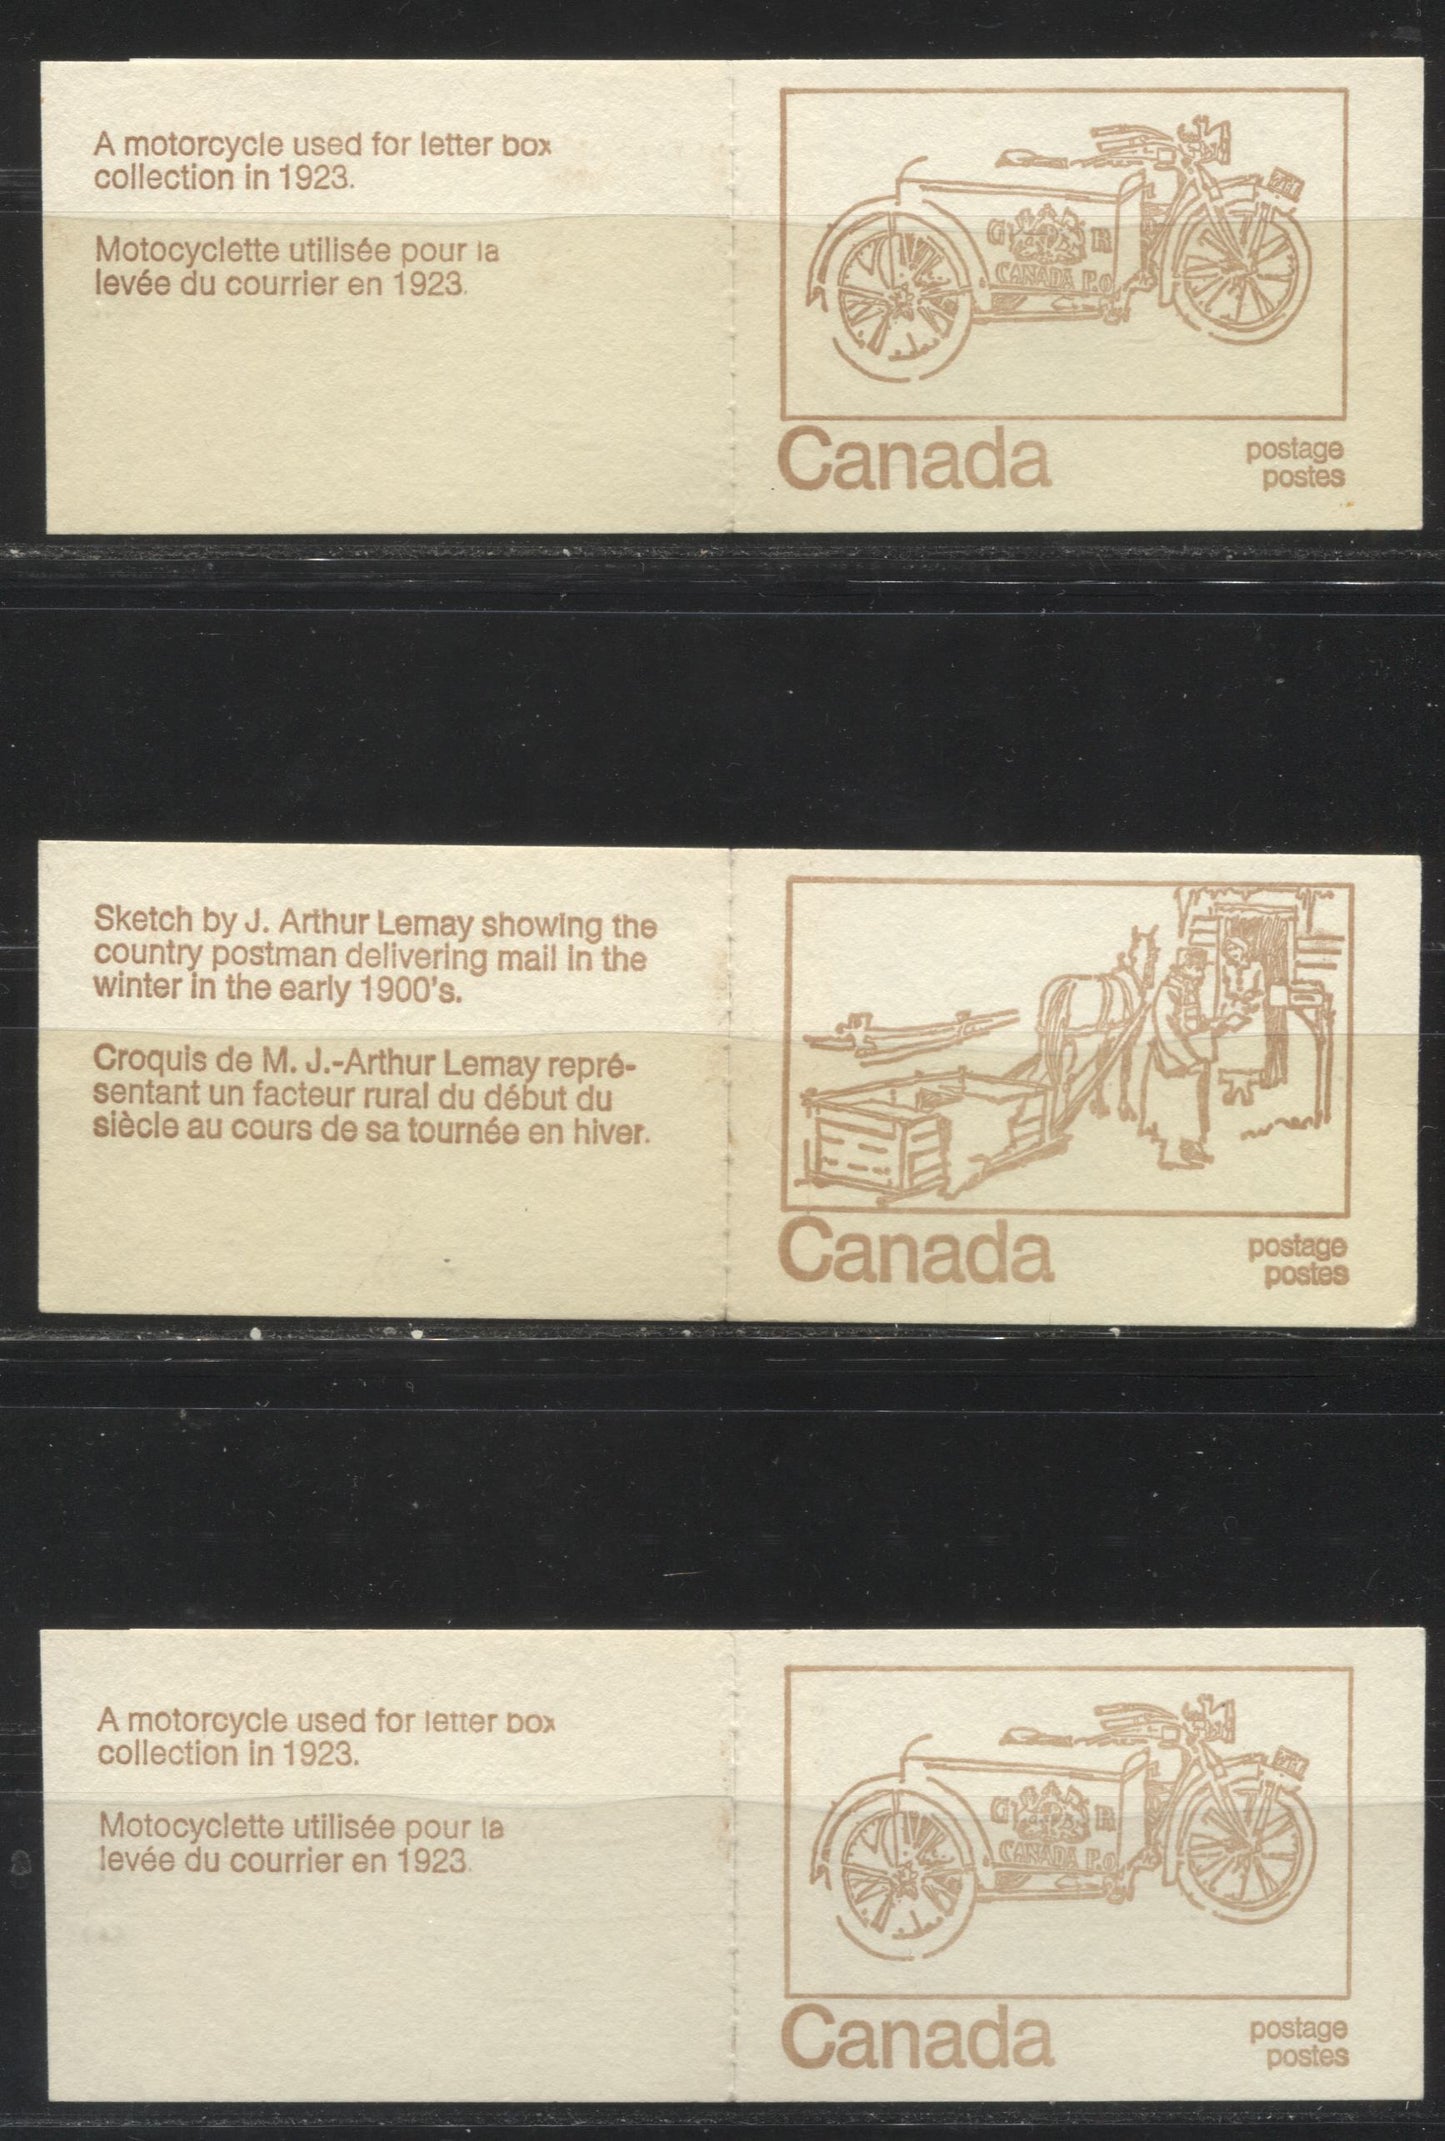 Lot #89 Canada McCann #BK69aj 1c Purple Brown, 6c Black, And 8c Slate, 1967-1973 Centennial Issue, A Specialized Lot of Five 25c Booklets, Type 3 Covers Clear Sealing Strip, HF-fl Smooth Paper, Settings A, B and C, OP-4 Tagging With 20 mm Spacing